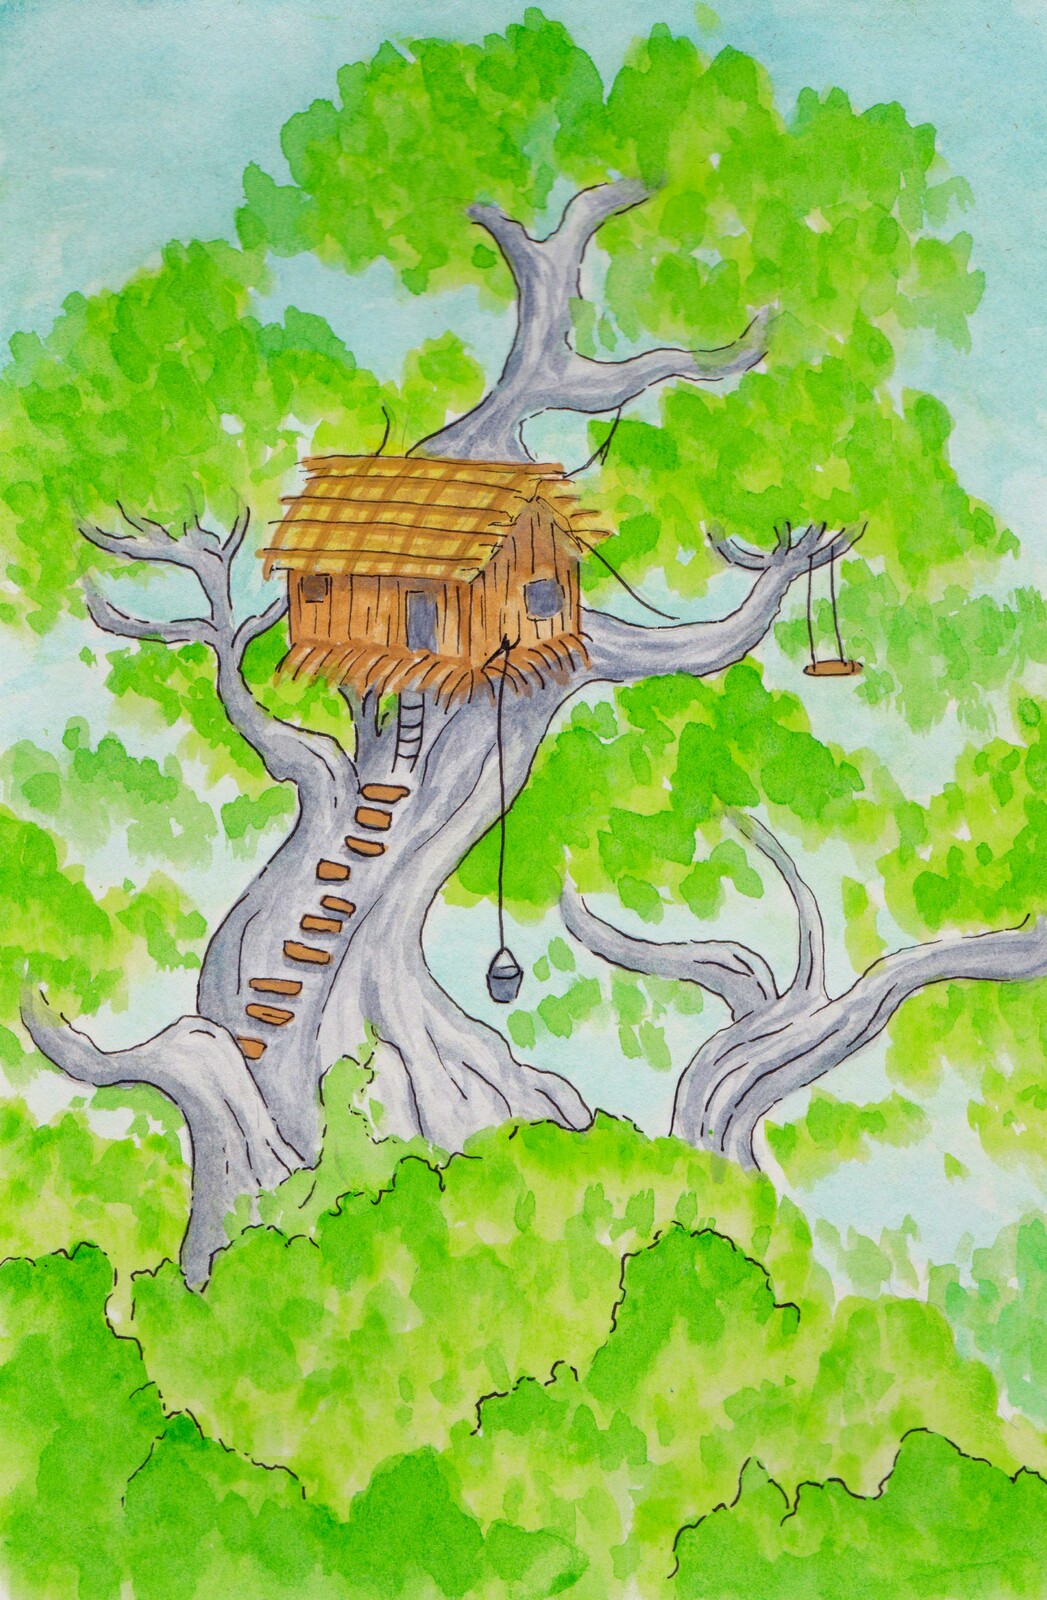 "The boy who lived in a tree" illustration 